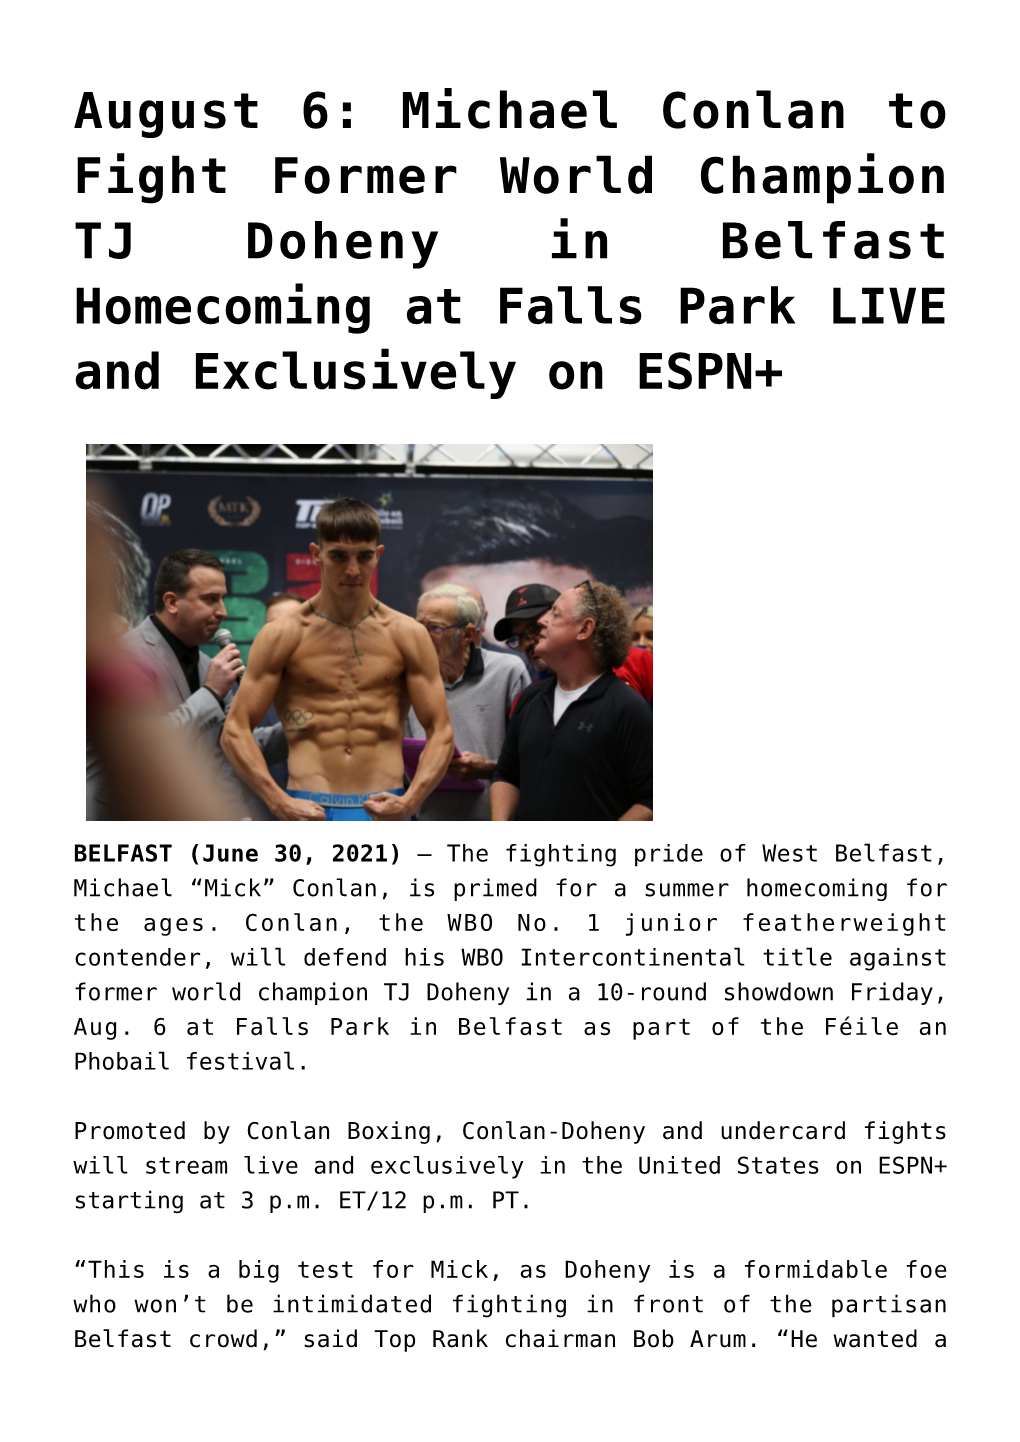 August 6: Michael Conlan to Fight Former World Champion TJ Doheny in Belfast Homecoming at Falls Park LIVE and Exclusively on ESPN+